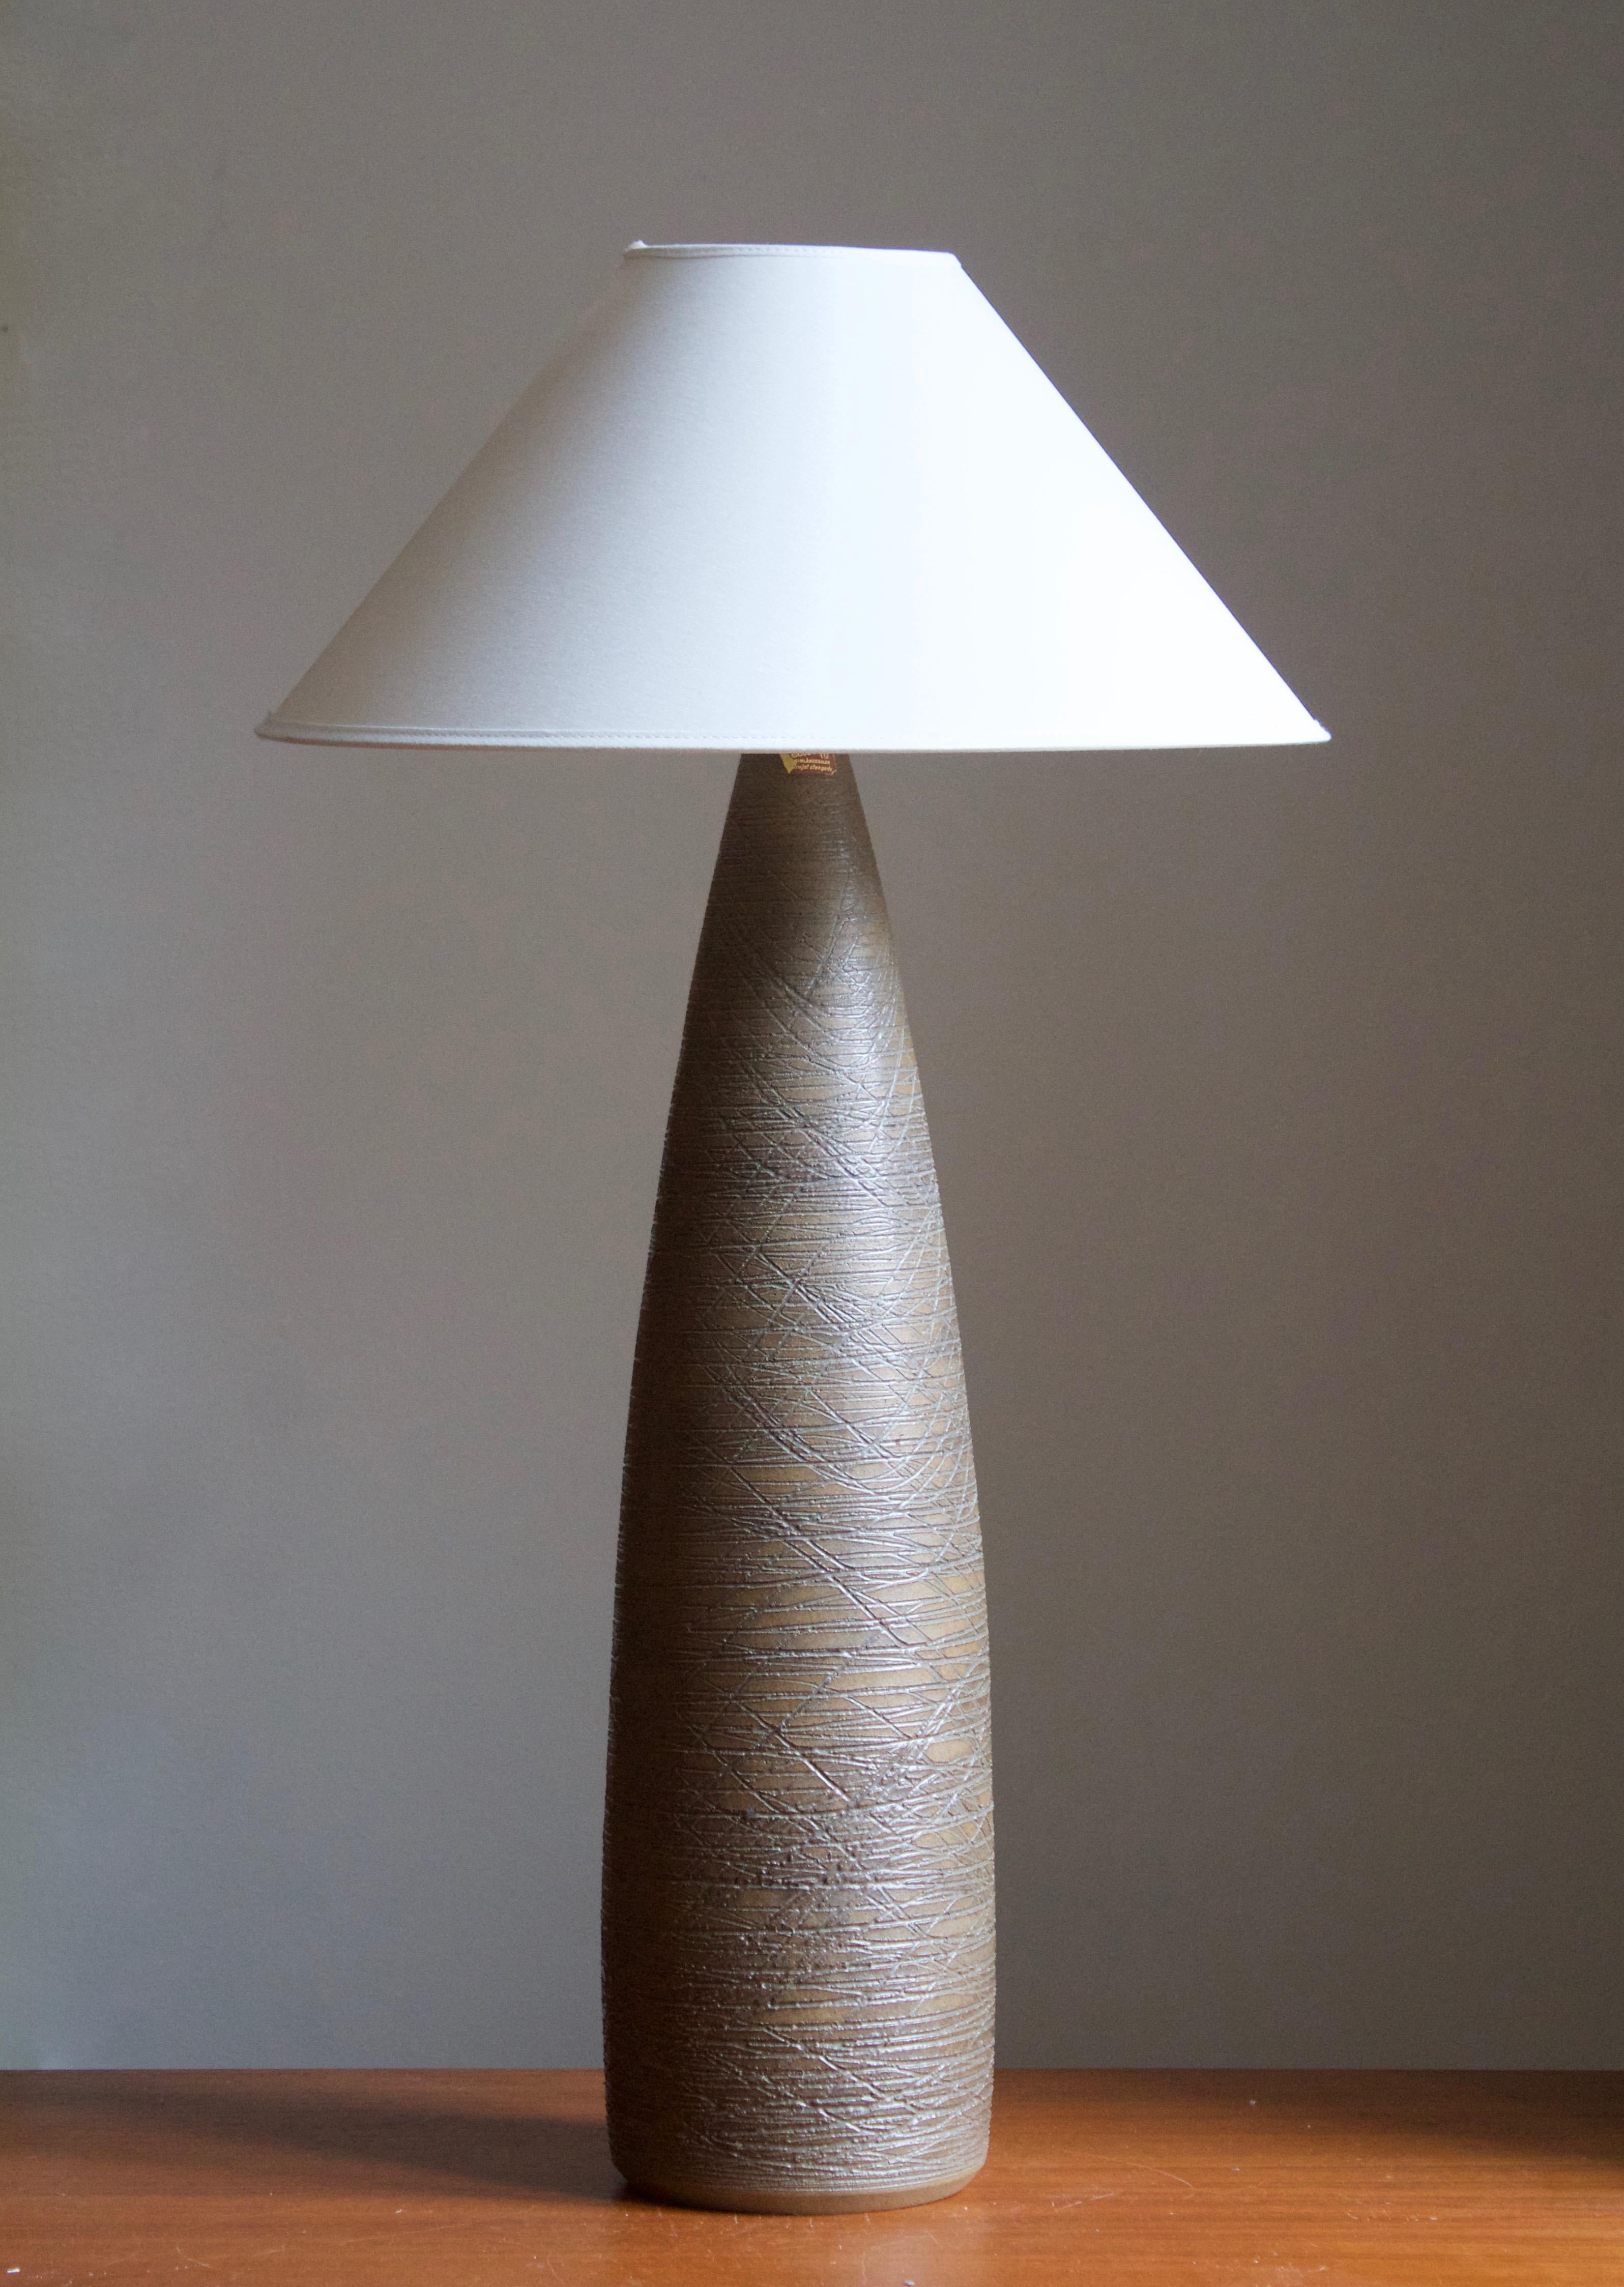 A very large table lamp produced by Danish ceramicist Aage Rasmus Selsbo in his studio, Simlångsdalen, Sweden, 1960s. Features Brown glaze and subtle incised decoration. Labeled and signed.

Sold without lampshade. Stated dimensions exclude